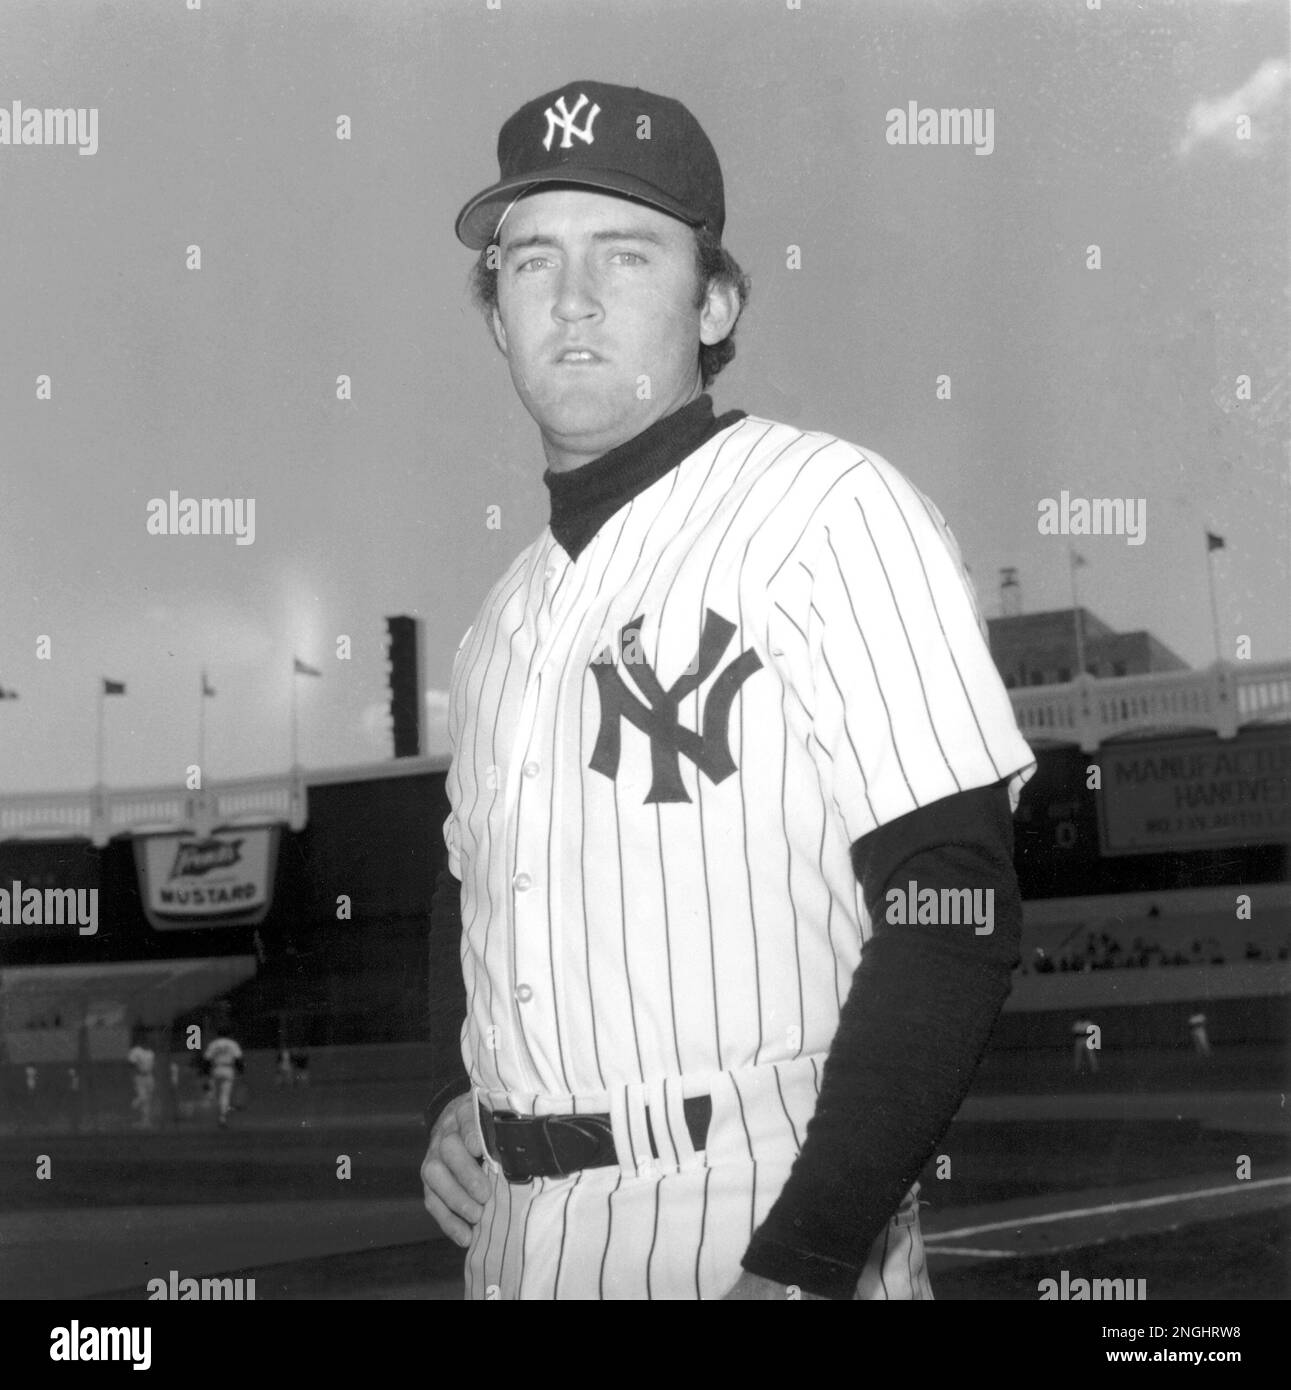 Graig Nettles of the New York Yankees poses in 1978 at an unknown